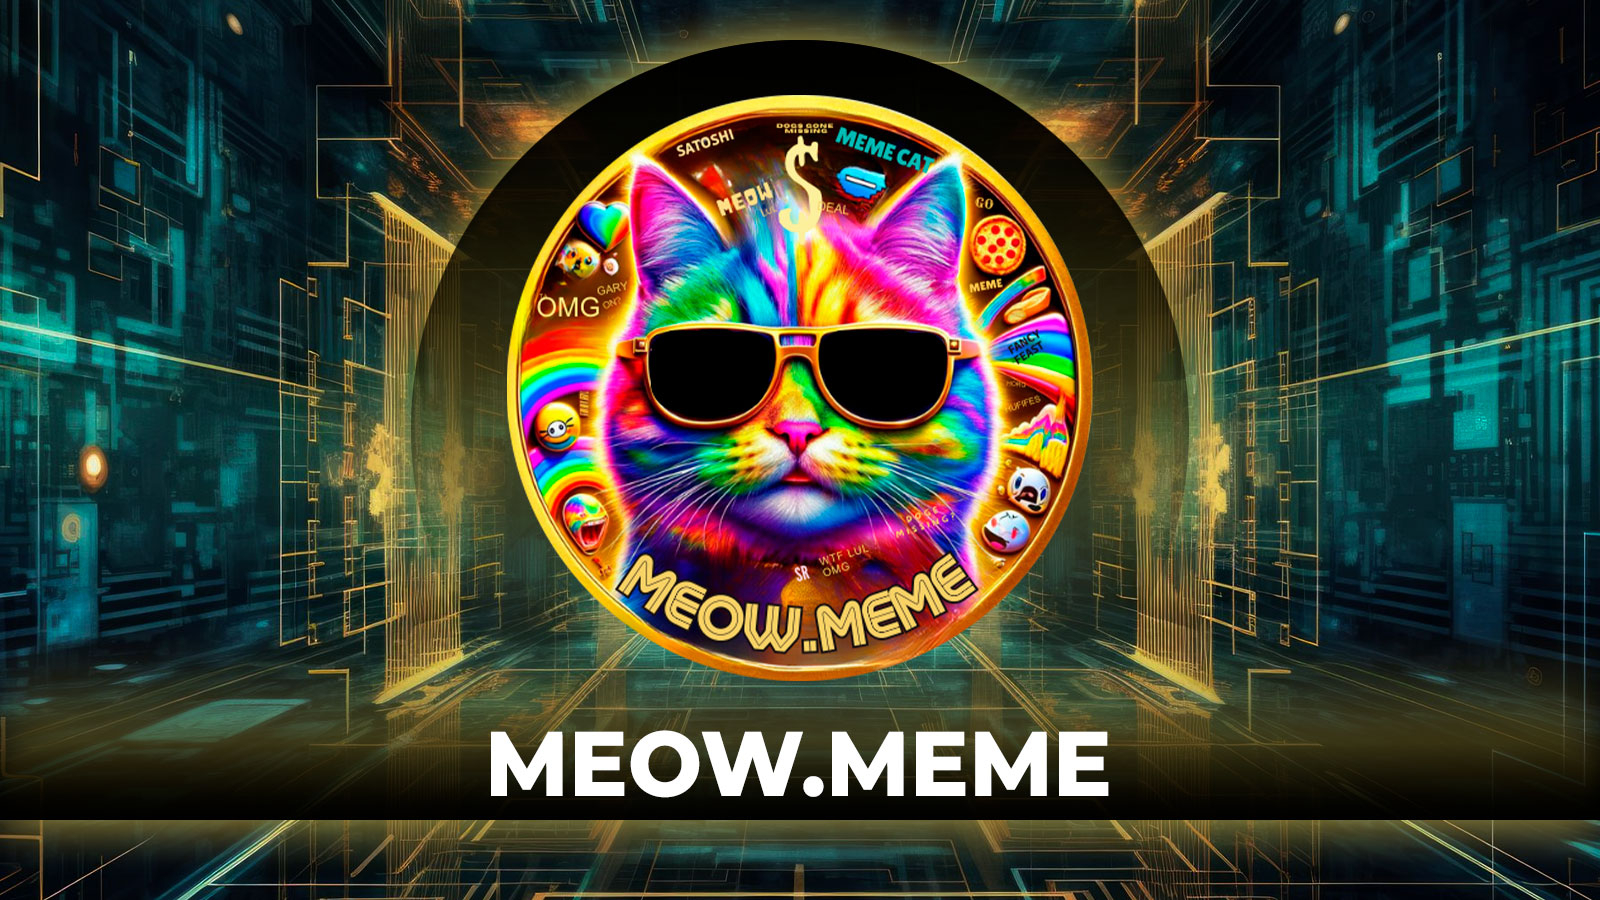 New Meow (MEOW) Meme Coin on Ethereum Sale Targets DOGE, SHIB communities